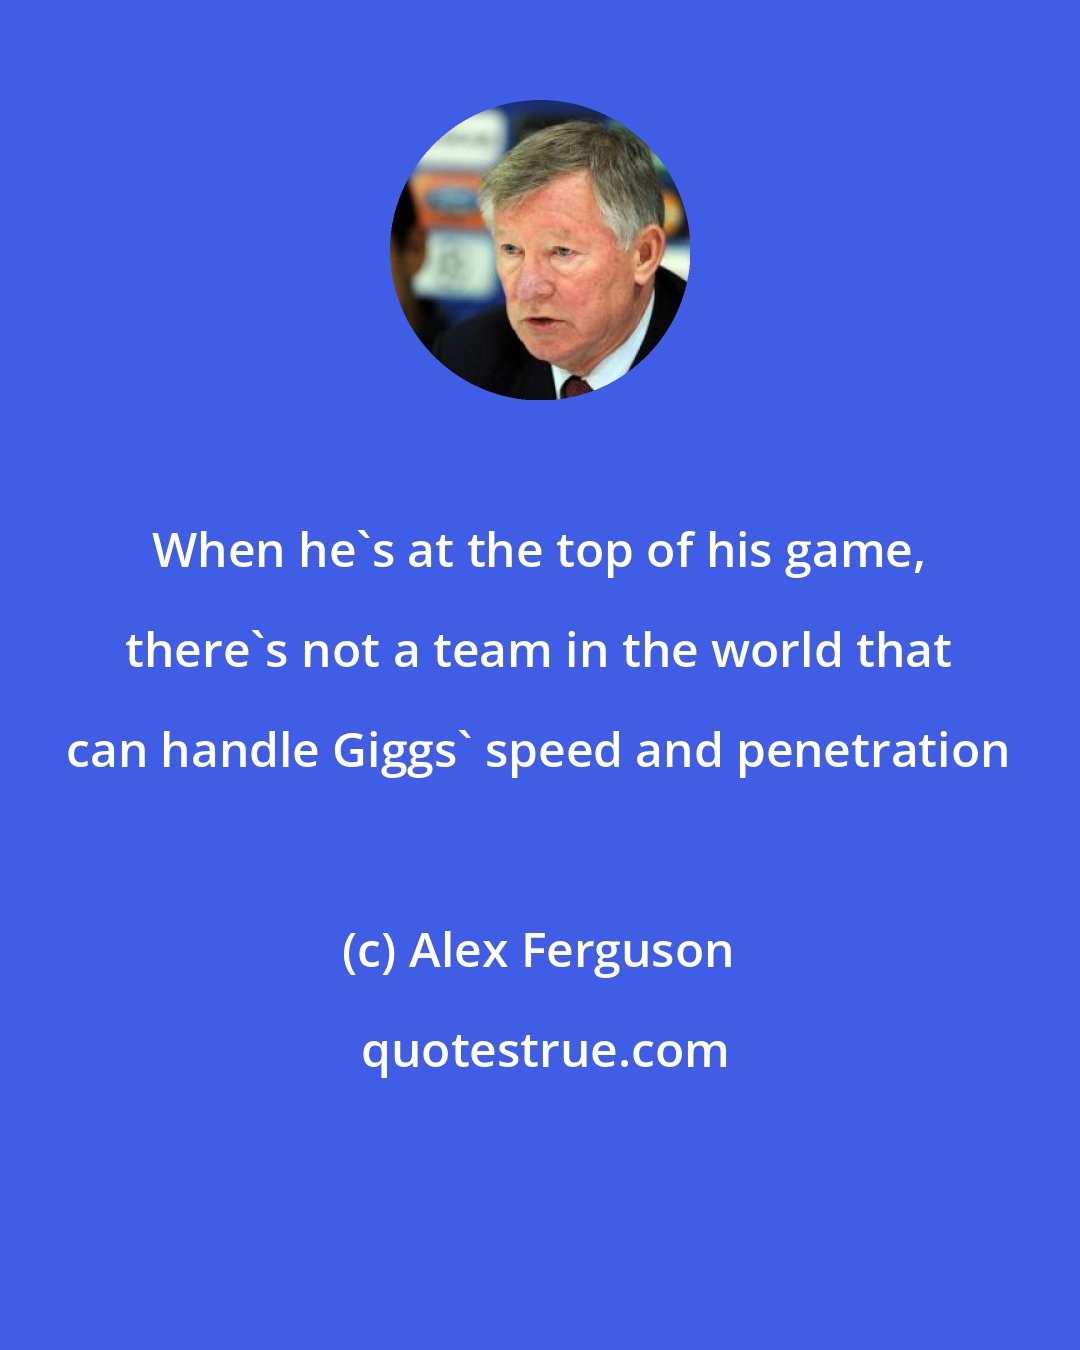 Alex Ferguson: When he's at the top of his game, there's not a team in the world that can handle Giggs' speed and penetration